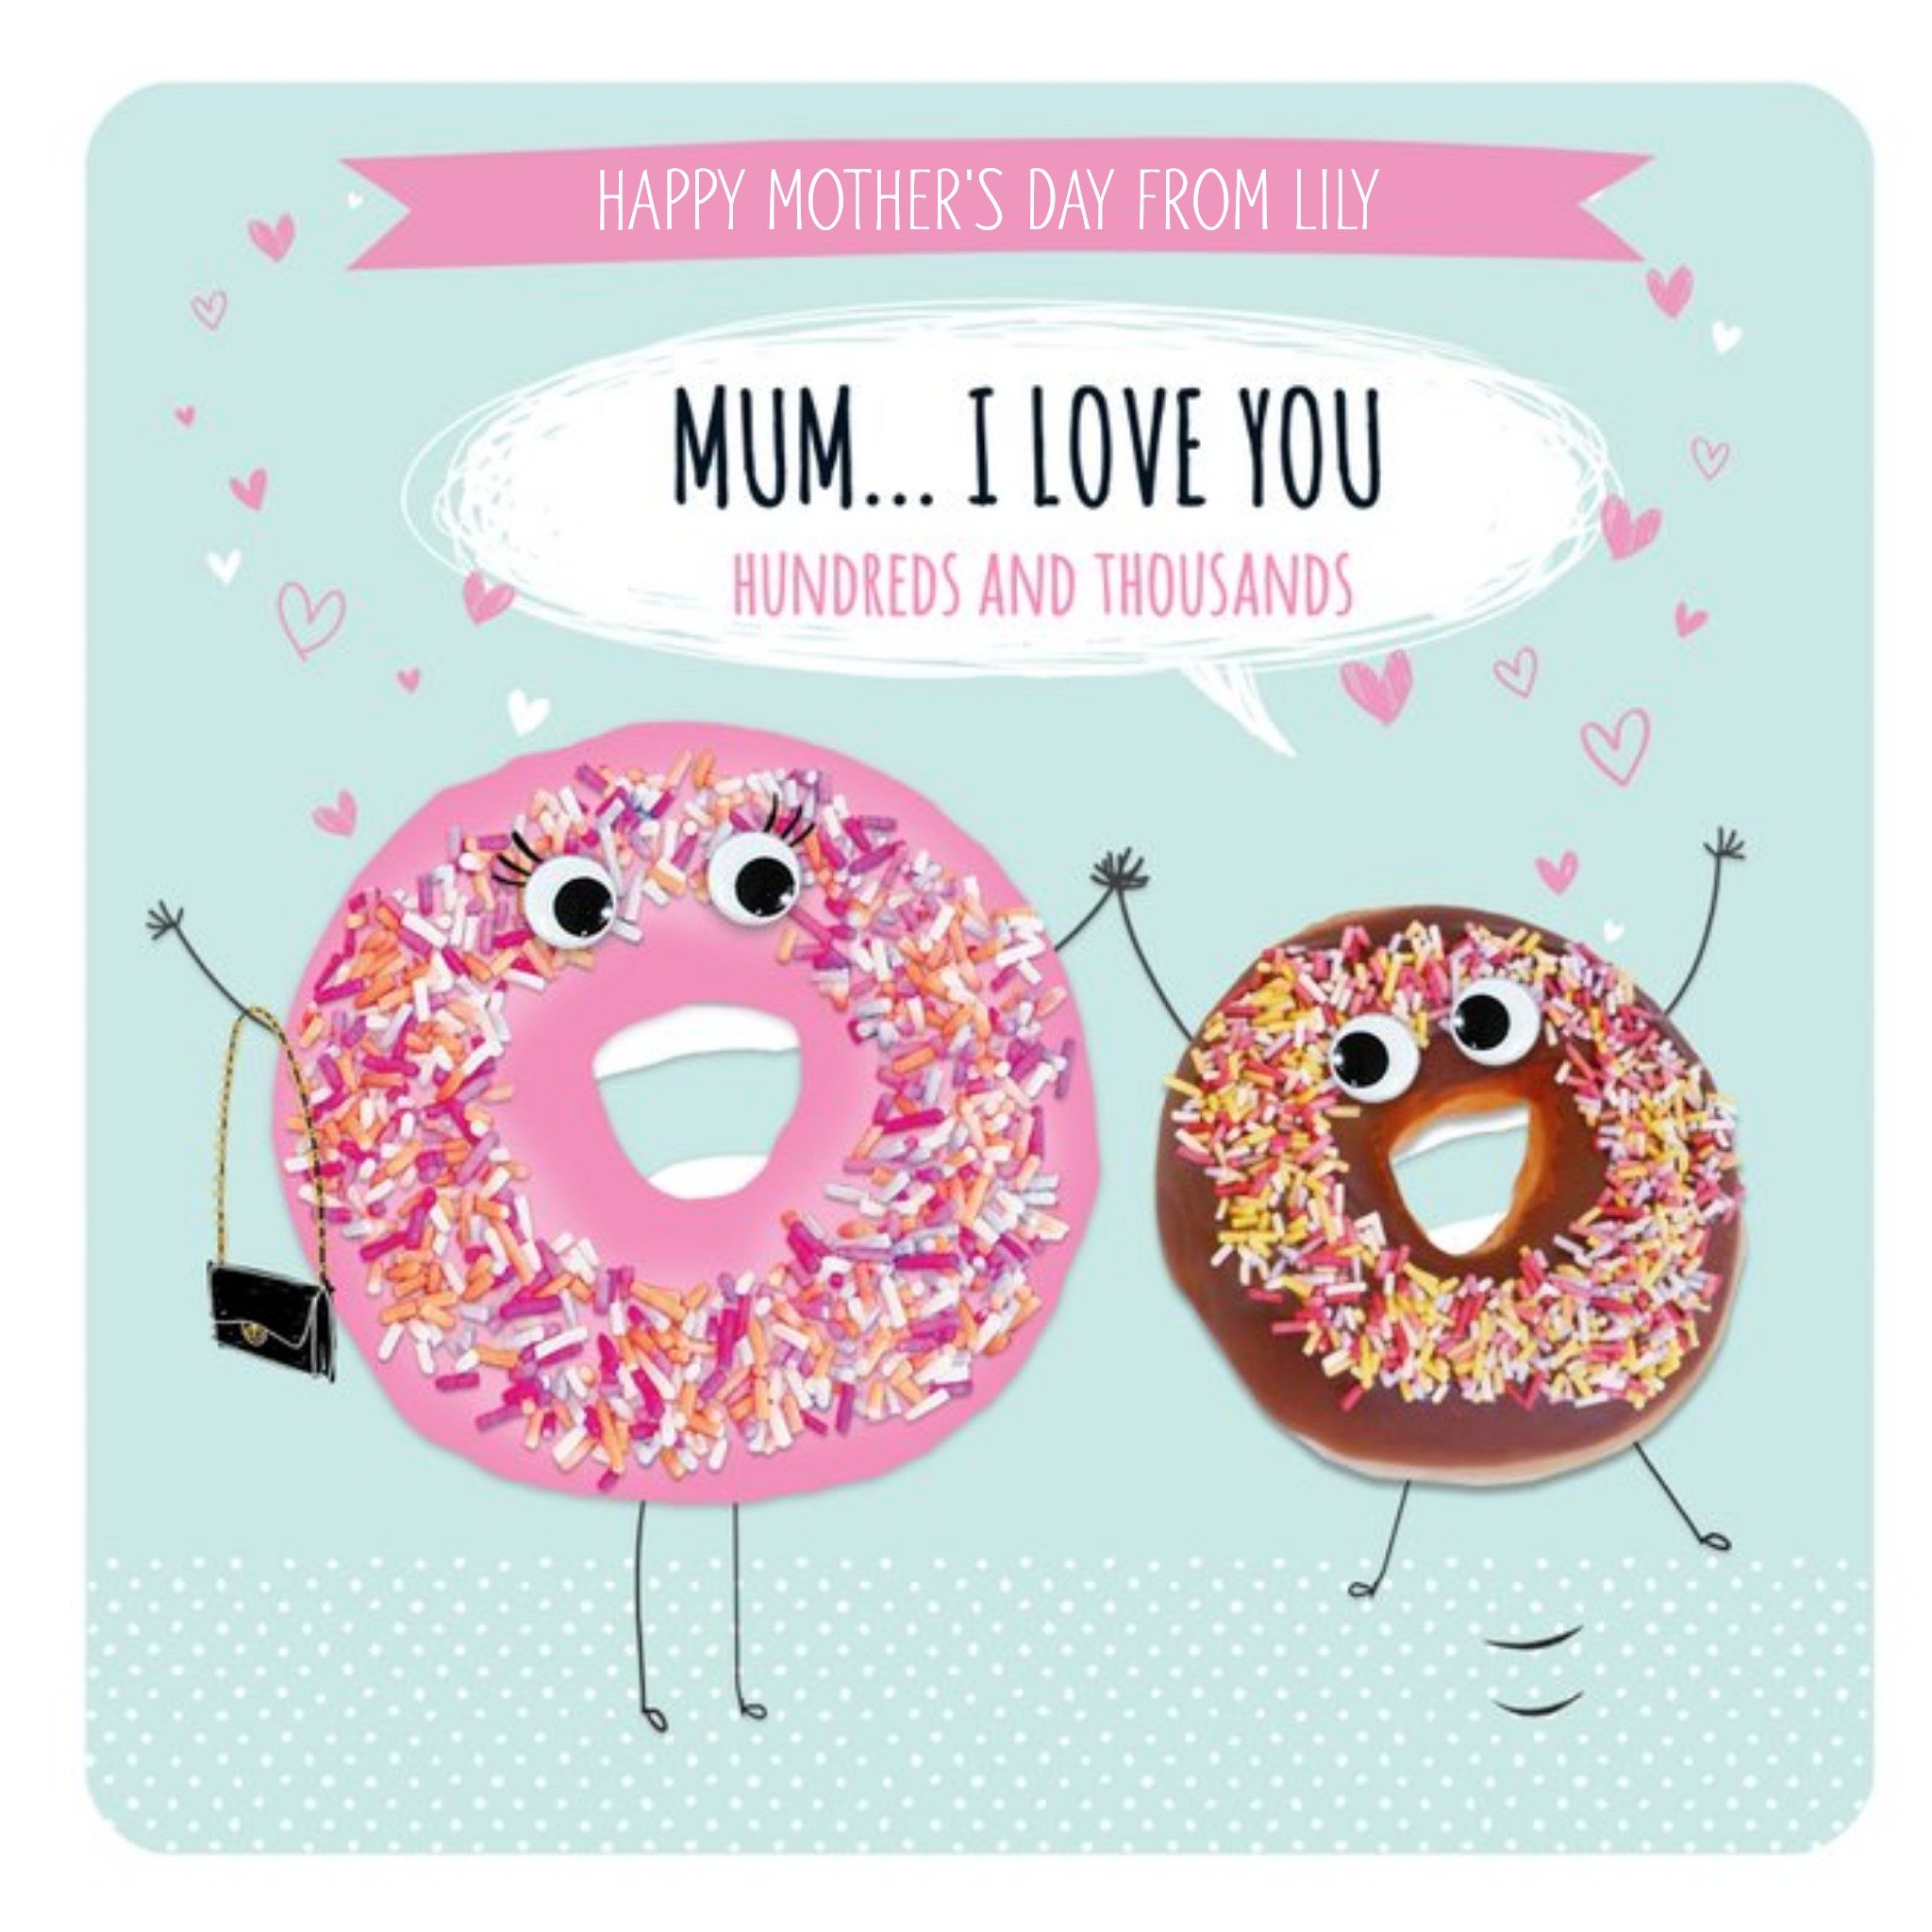 Moonpig Sprinkled Donuts Mum... I Love You Card, Square